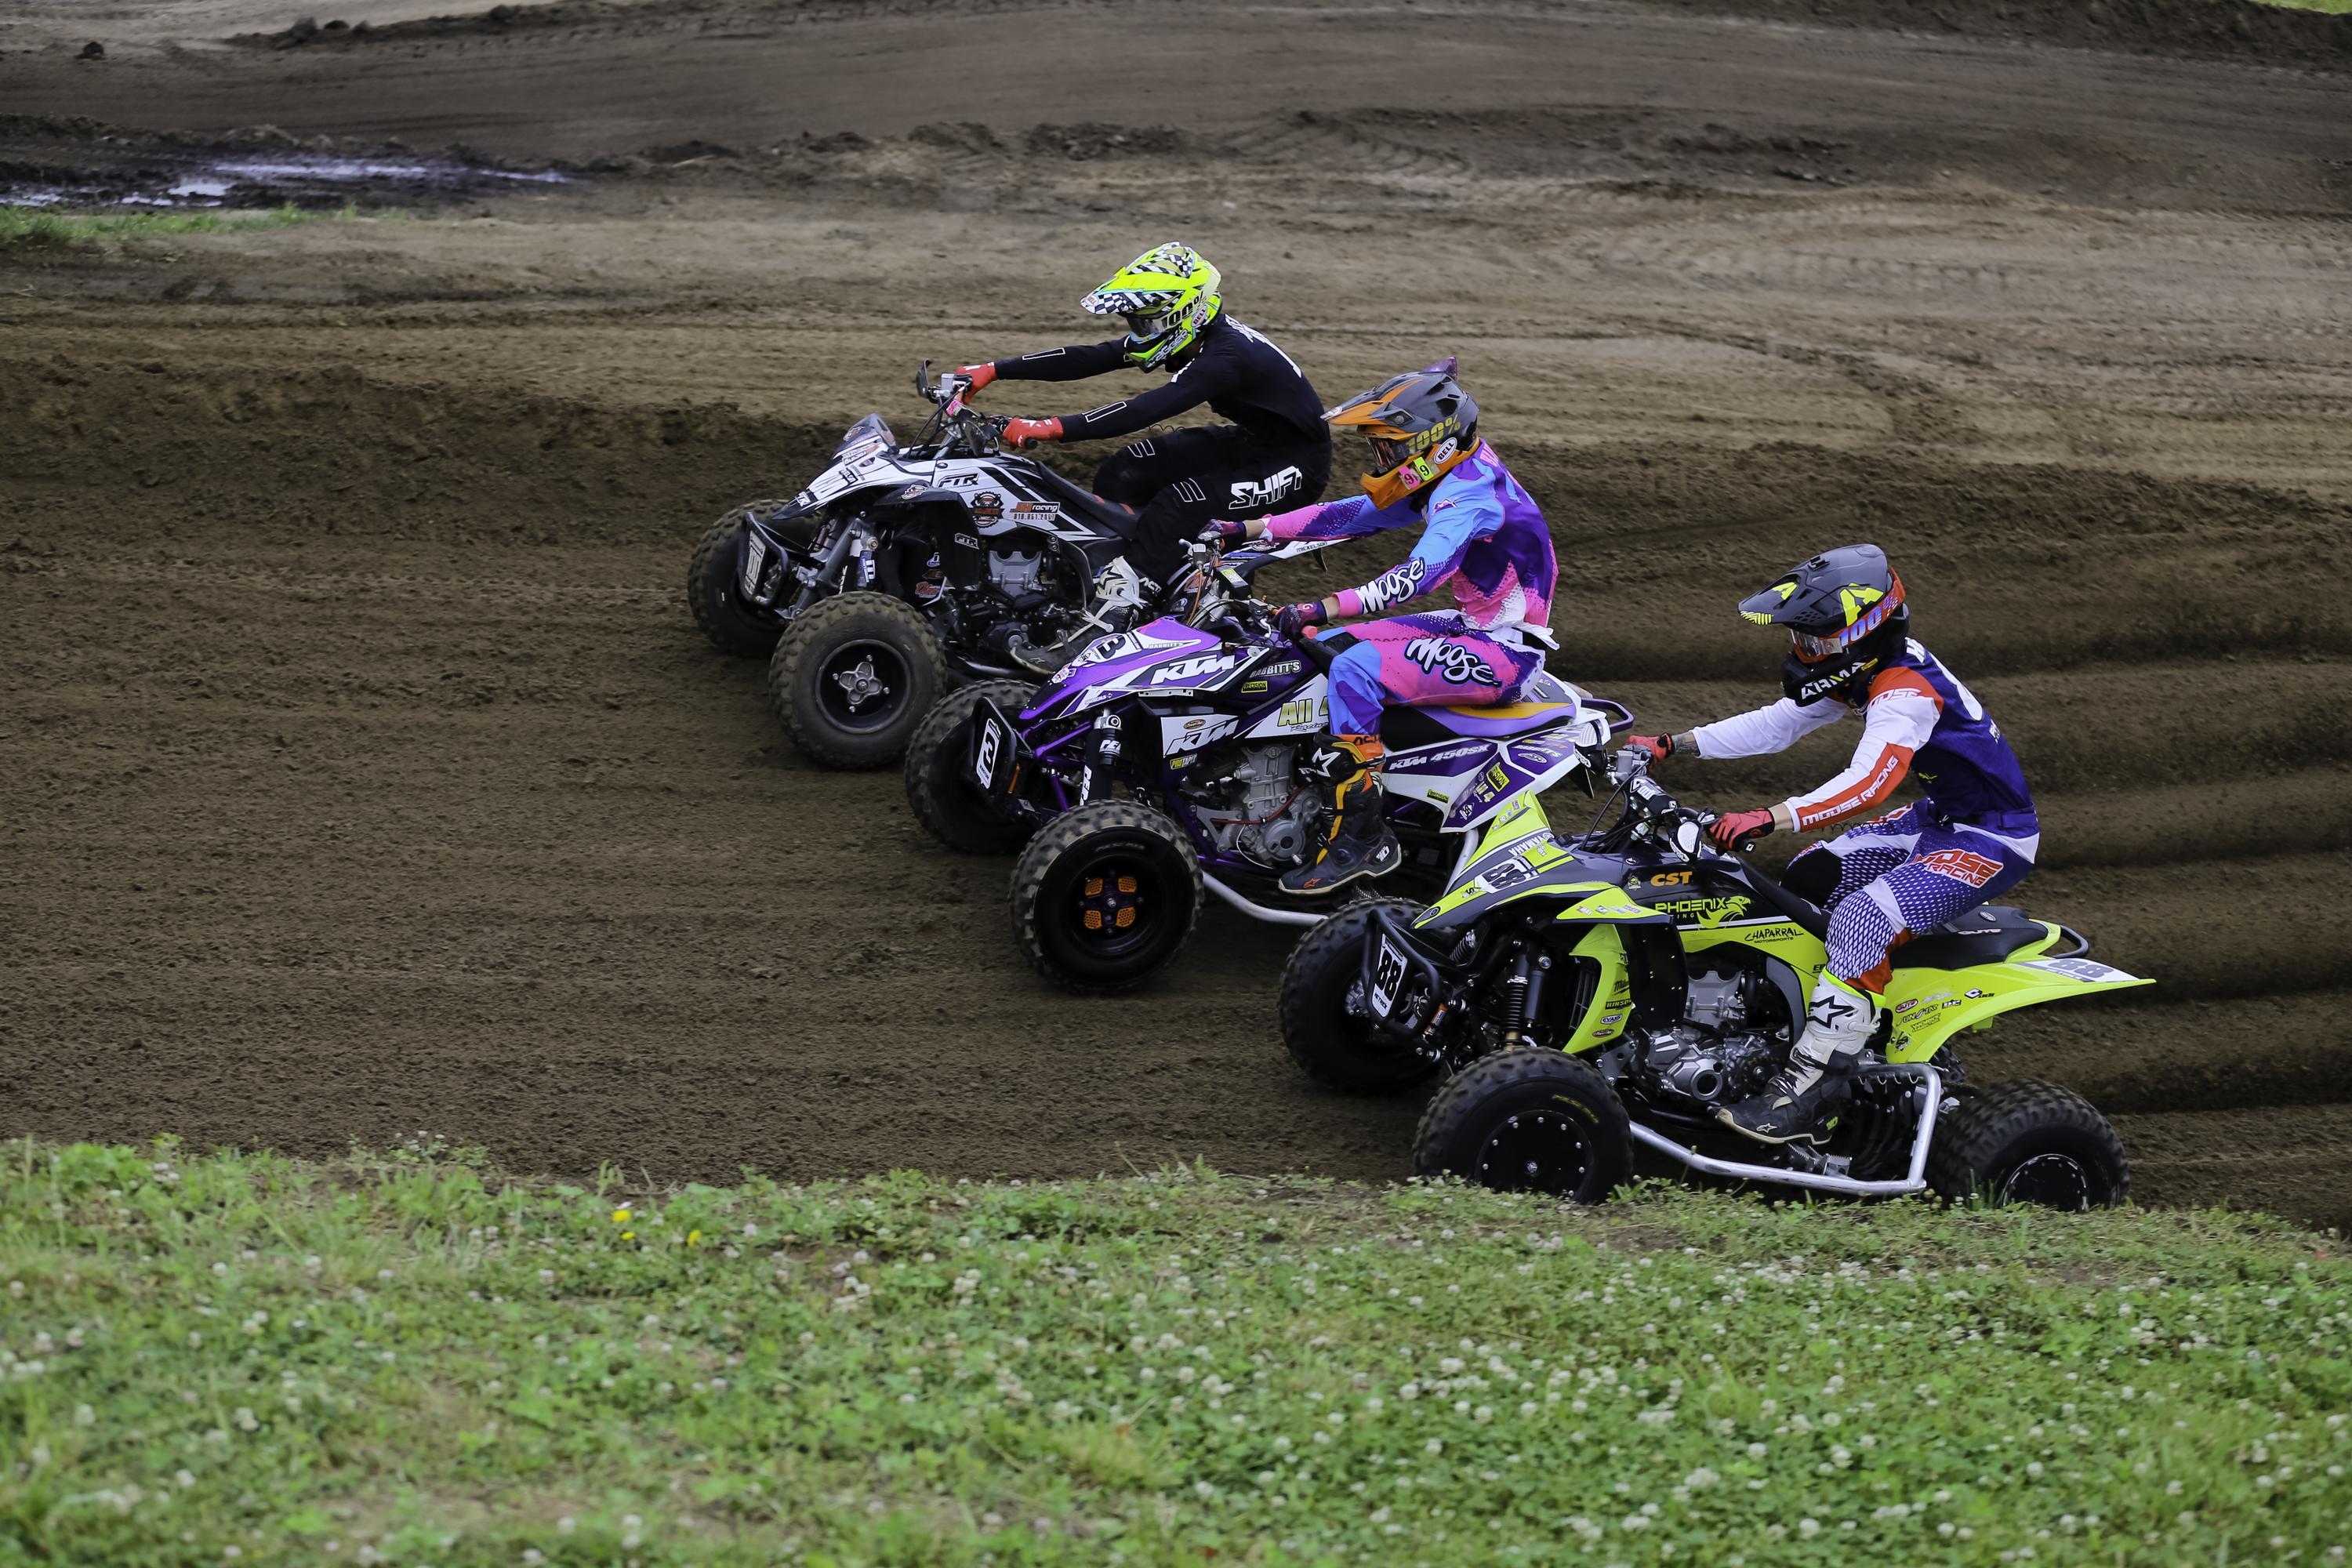 Competition Bulletin 2021-9: Tentative 2022 ATVMX AMA Pro Rules, ATVMX Amateur Supplemental Rules and National Classes Available for Public Comment